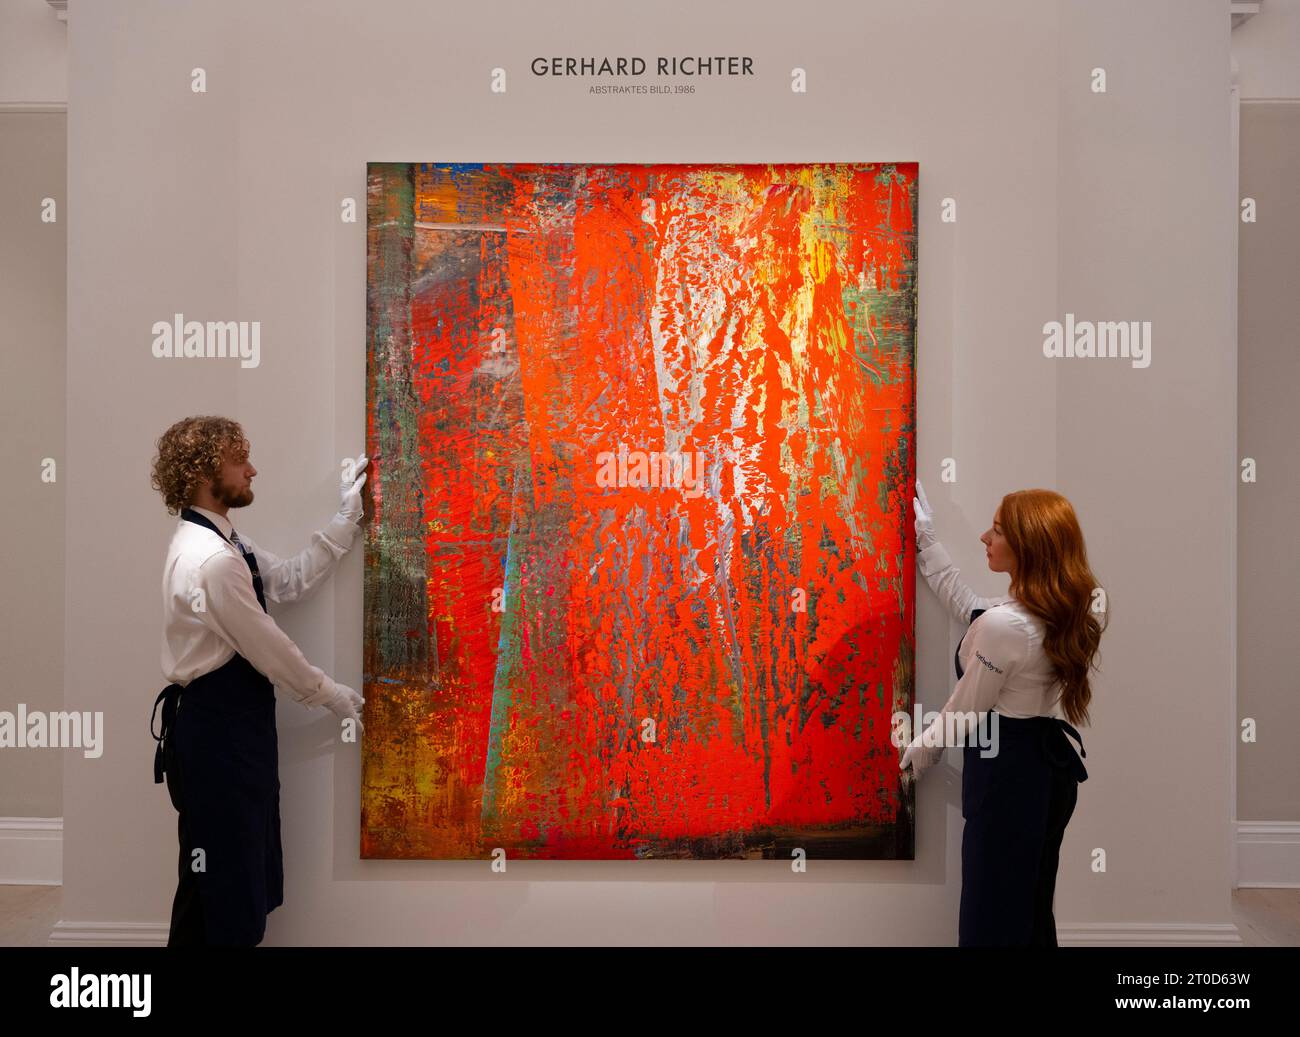 Sotheby's, London, UK. 6th Oct, 2023. Highlights from Sotheby's London Contemporary Frieze Art sales & The Fisher Landau Collection are on view Contemporary Evening Auction works include: Gerhard Richter, Abstraktes Bild, estimate £16,000,000 - 24,000,000. Credit: Malcolm Park/Alamy Live News Stock Photo